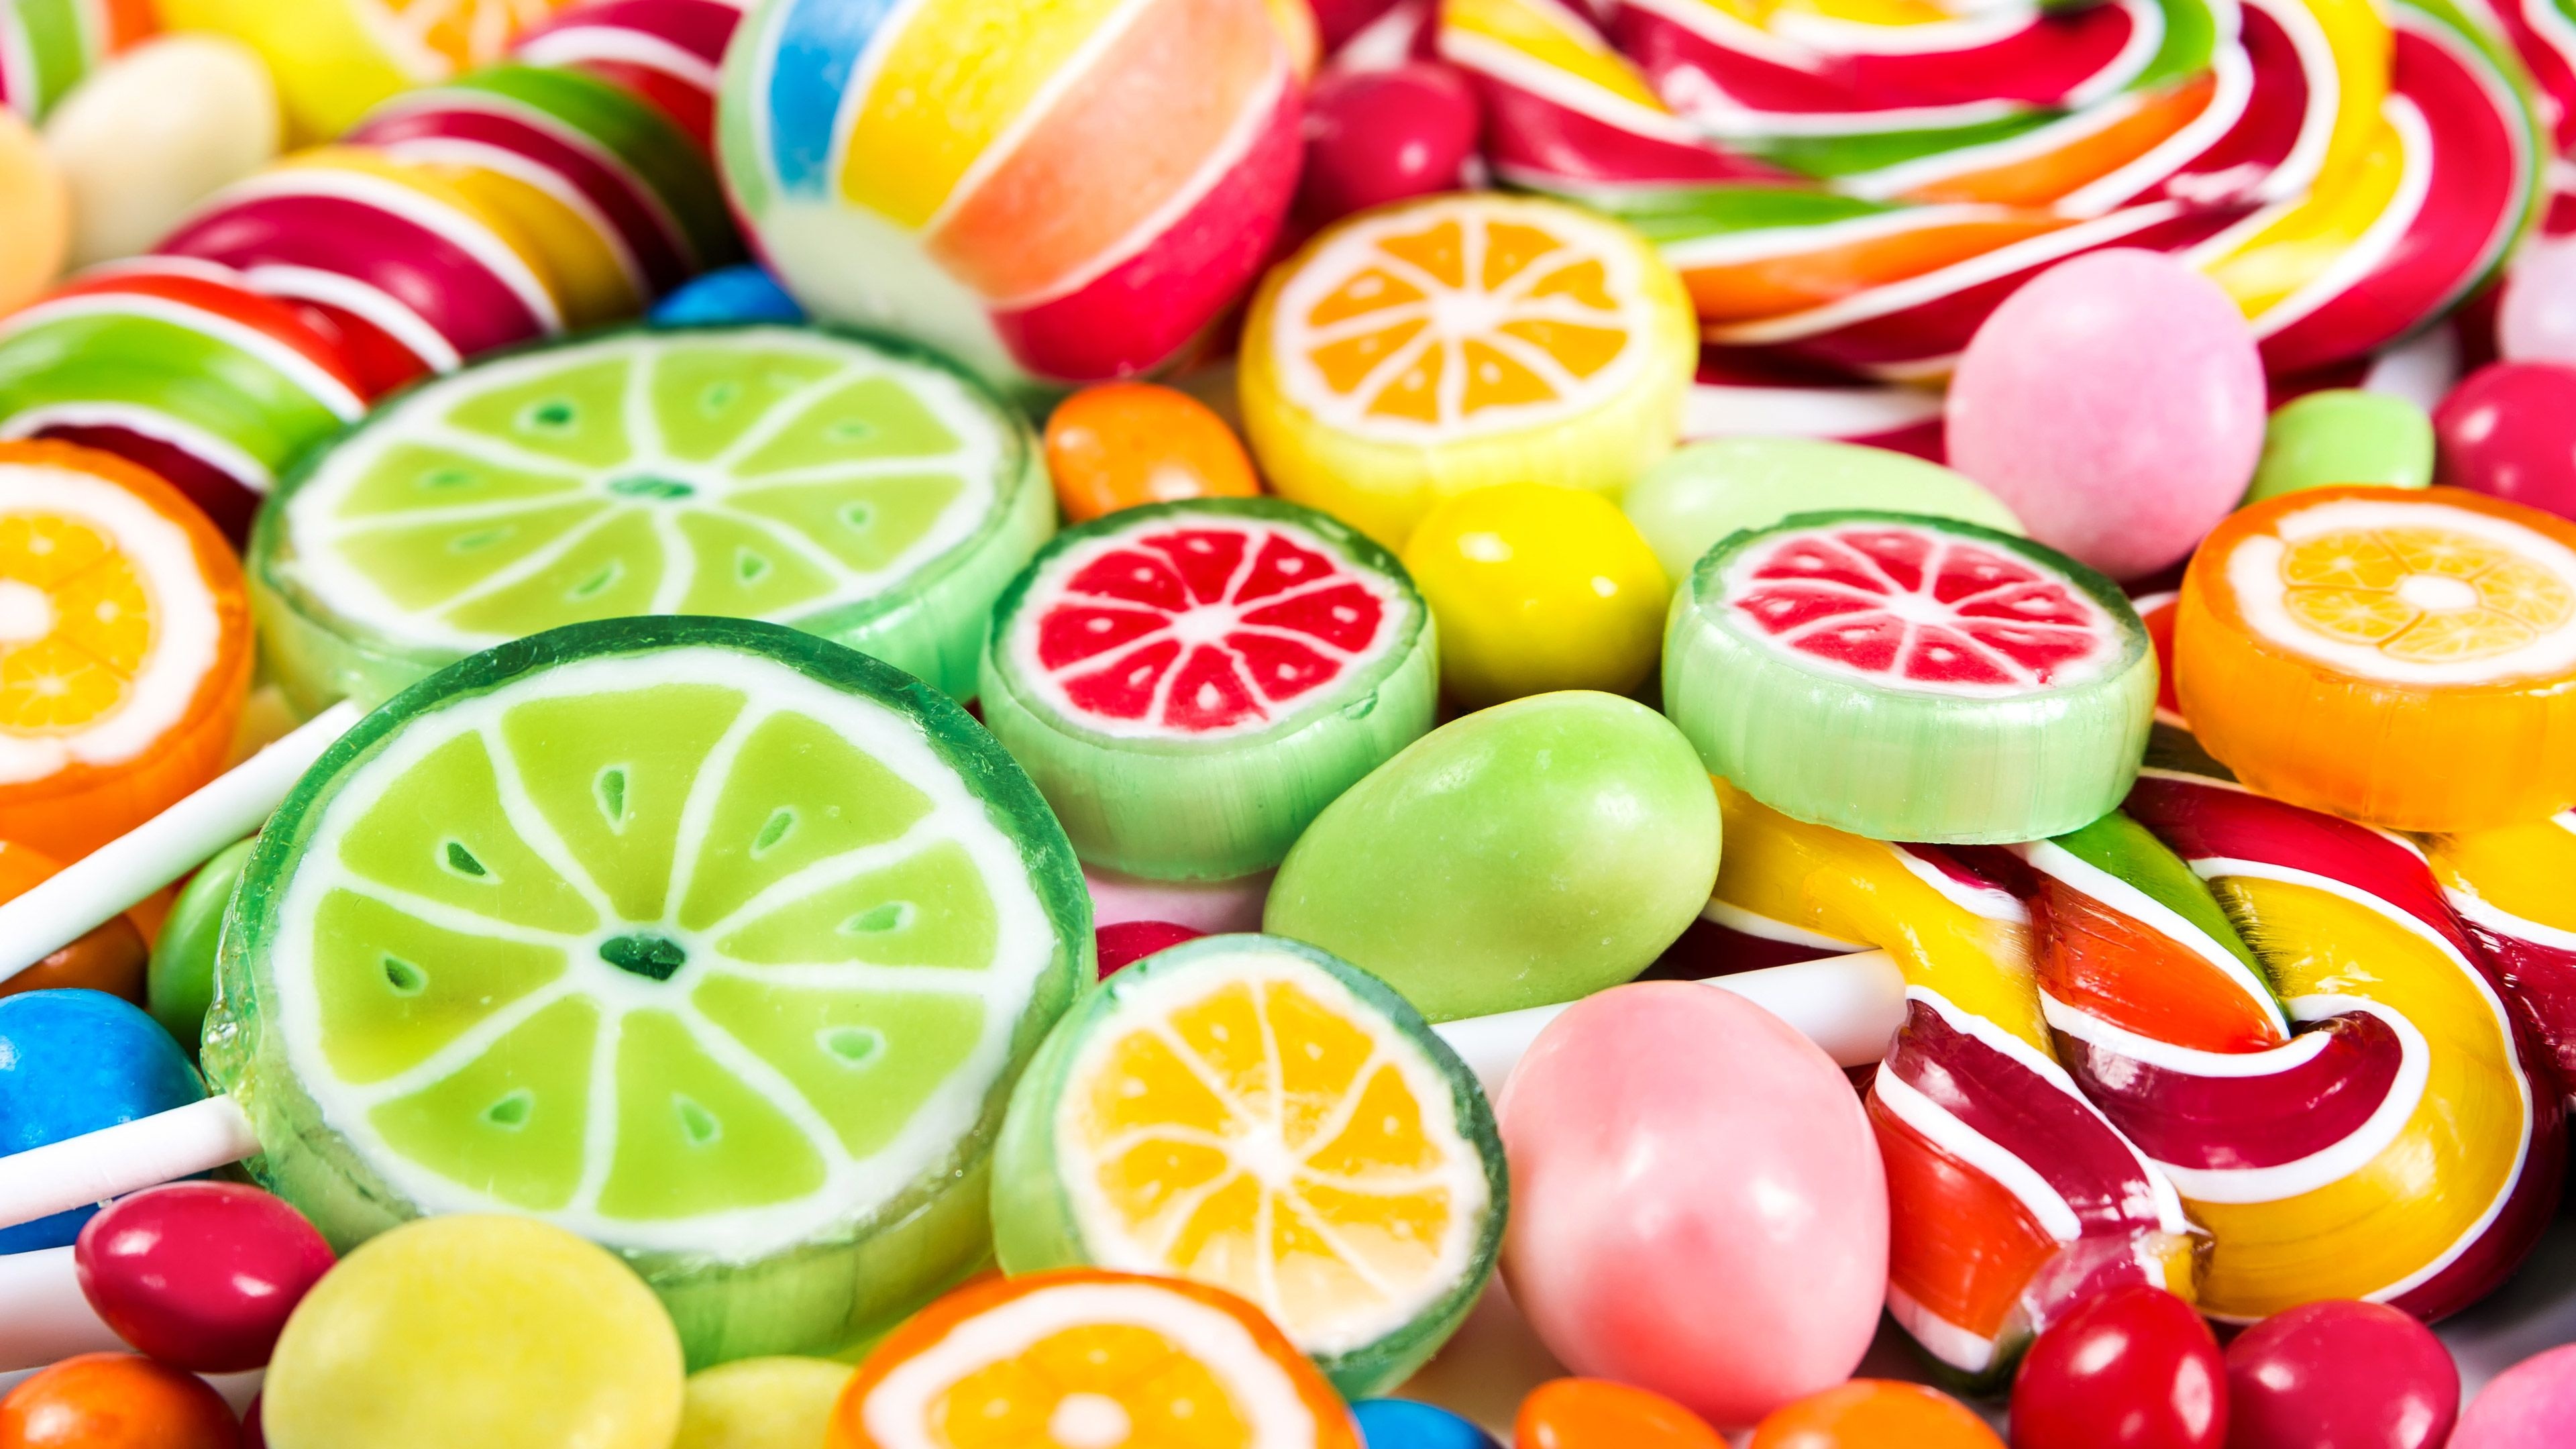 Candy laptop wallpapers, Sweet and colorful, Eye-catching designs, Sugary inspiration, 3840x2160 4K Desktop